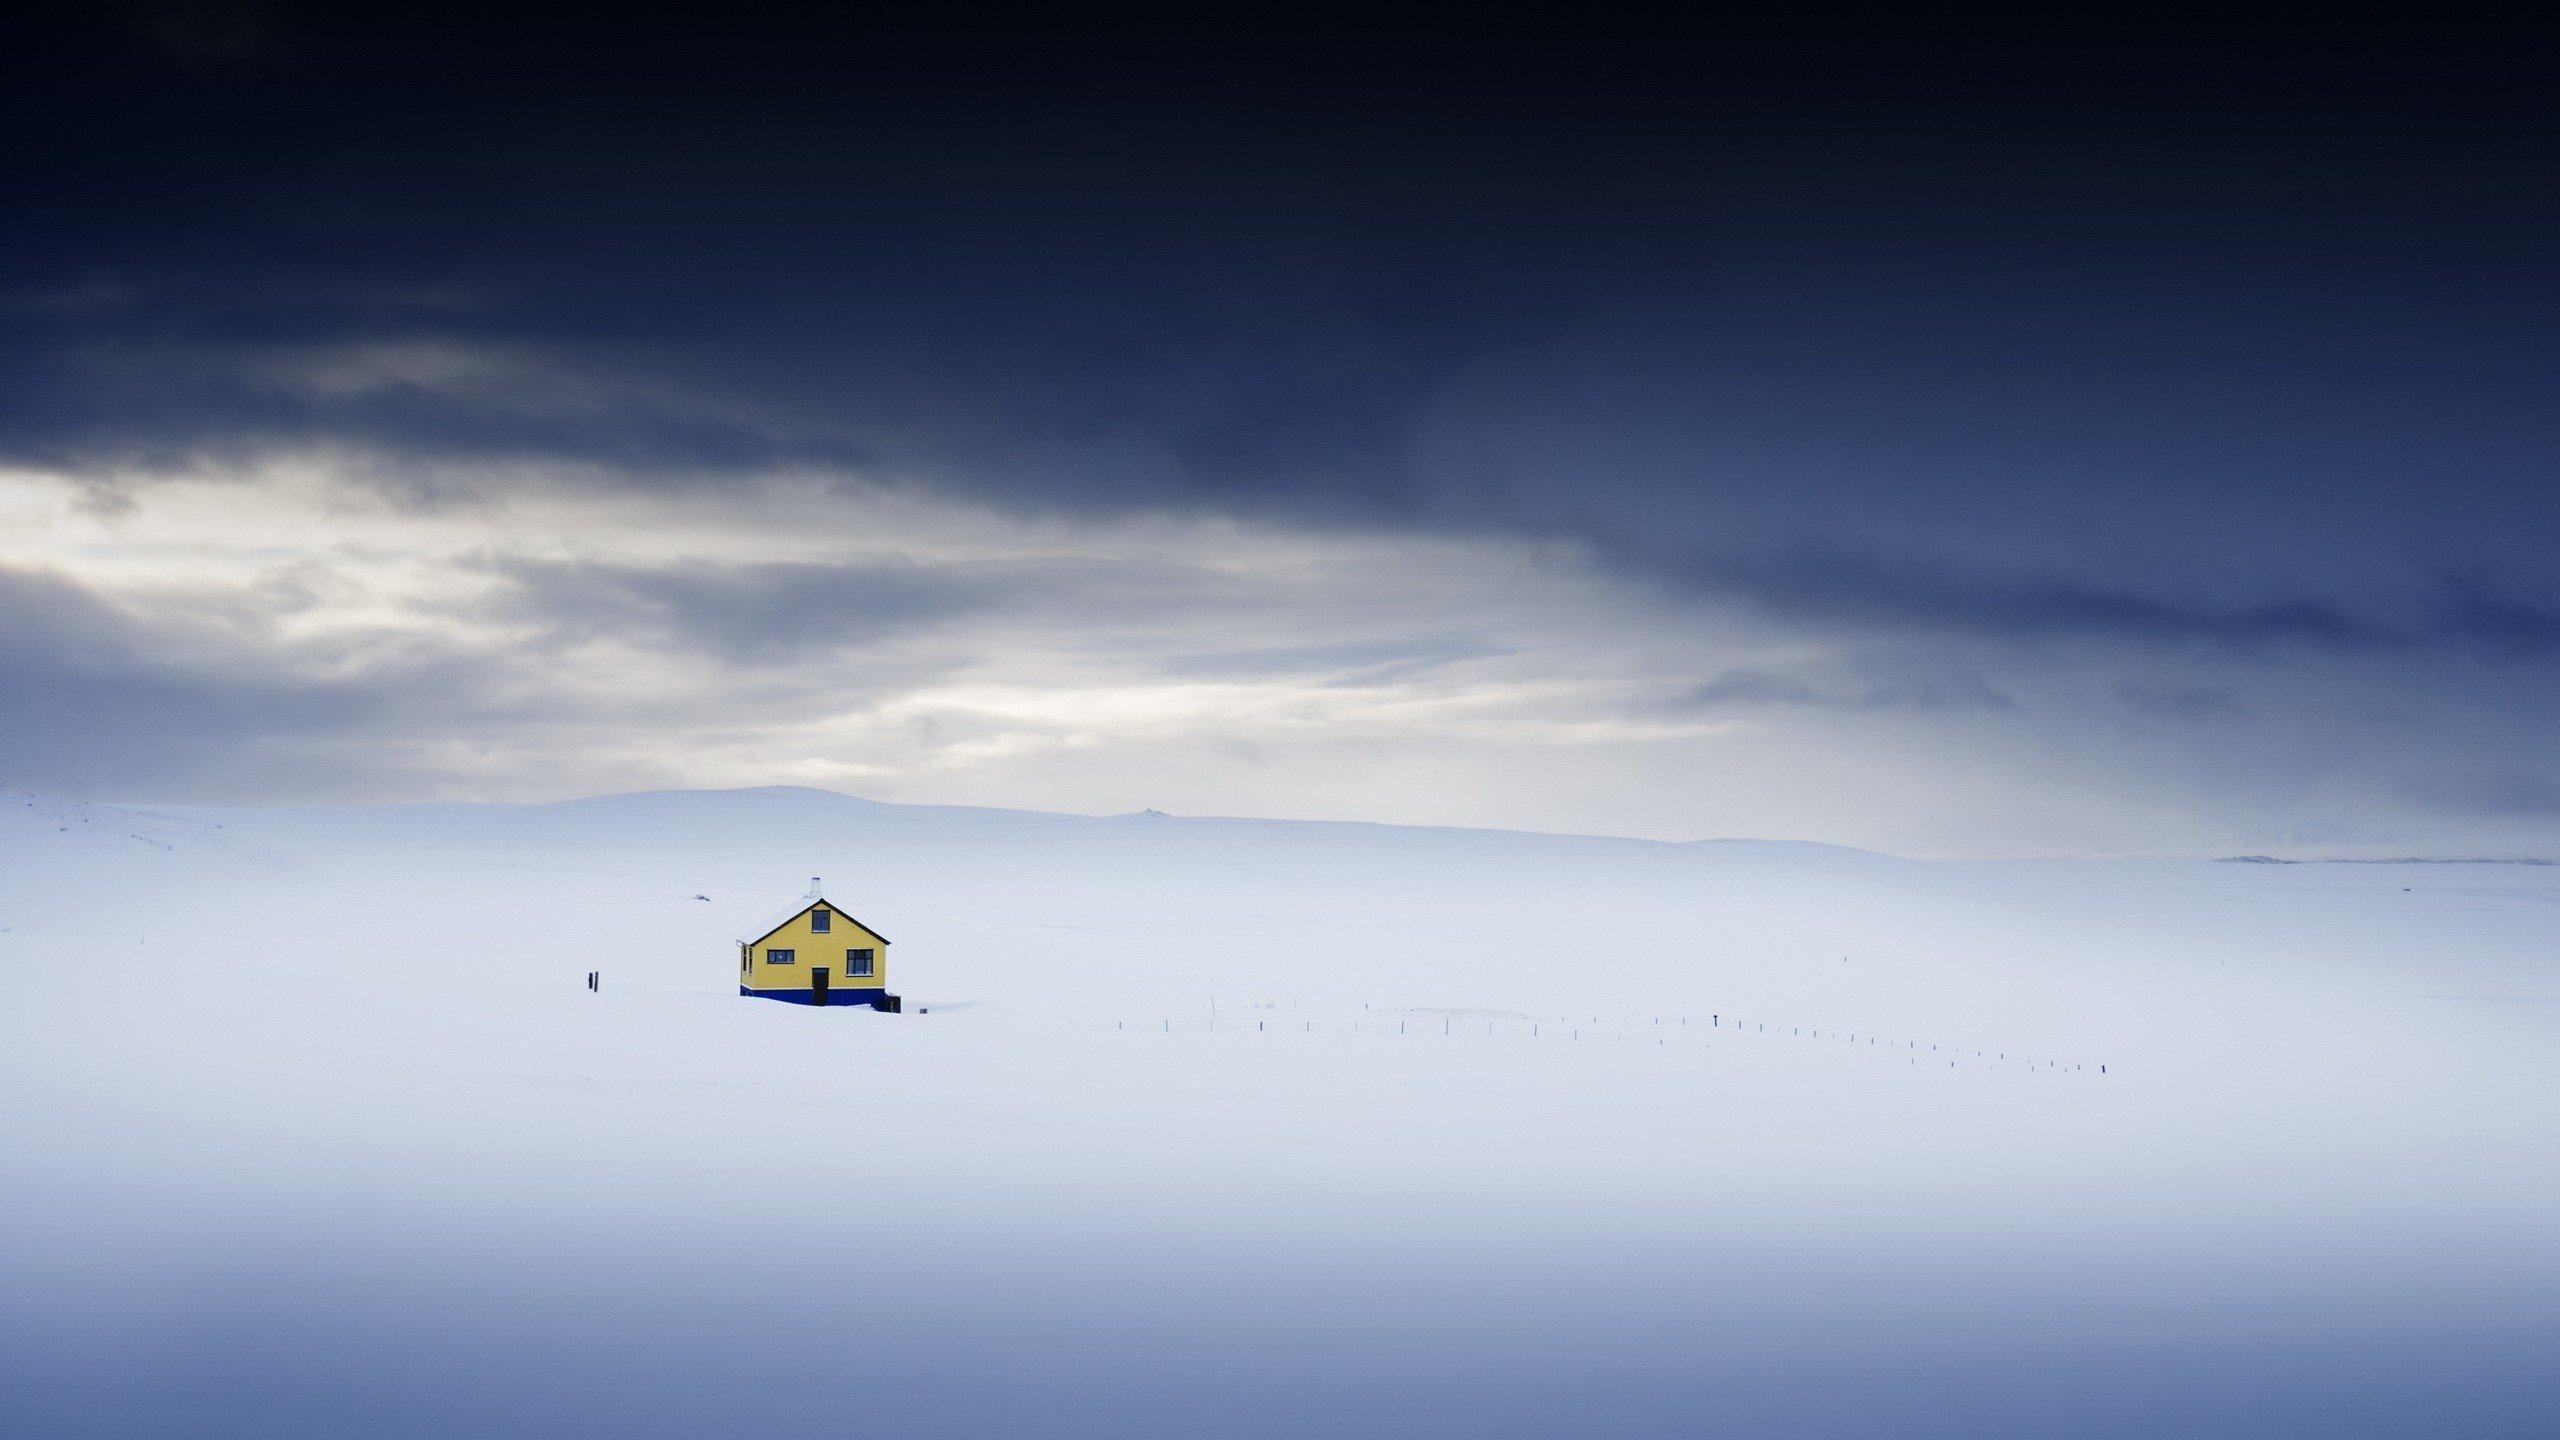 Alone House On Top Of Ice Mountains, HD Nature, 4k